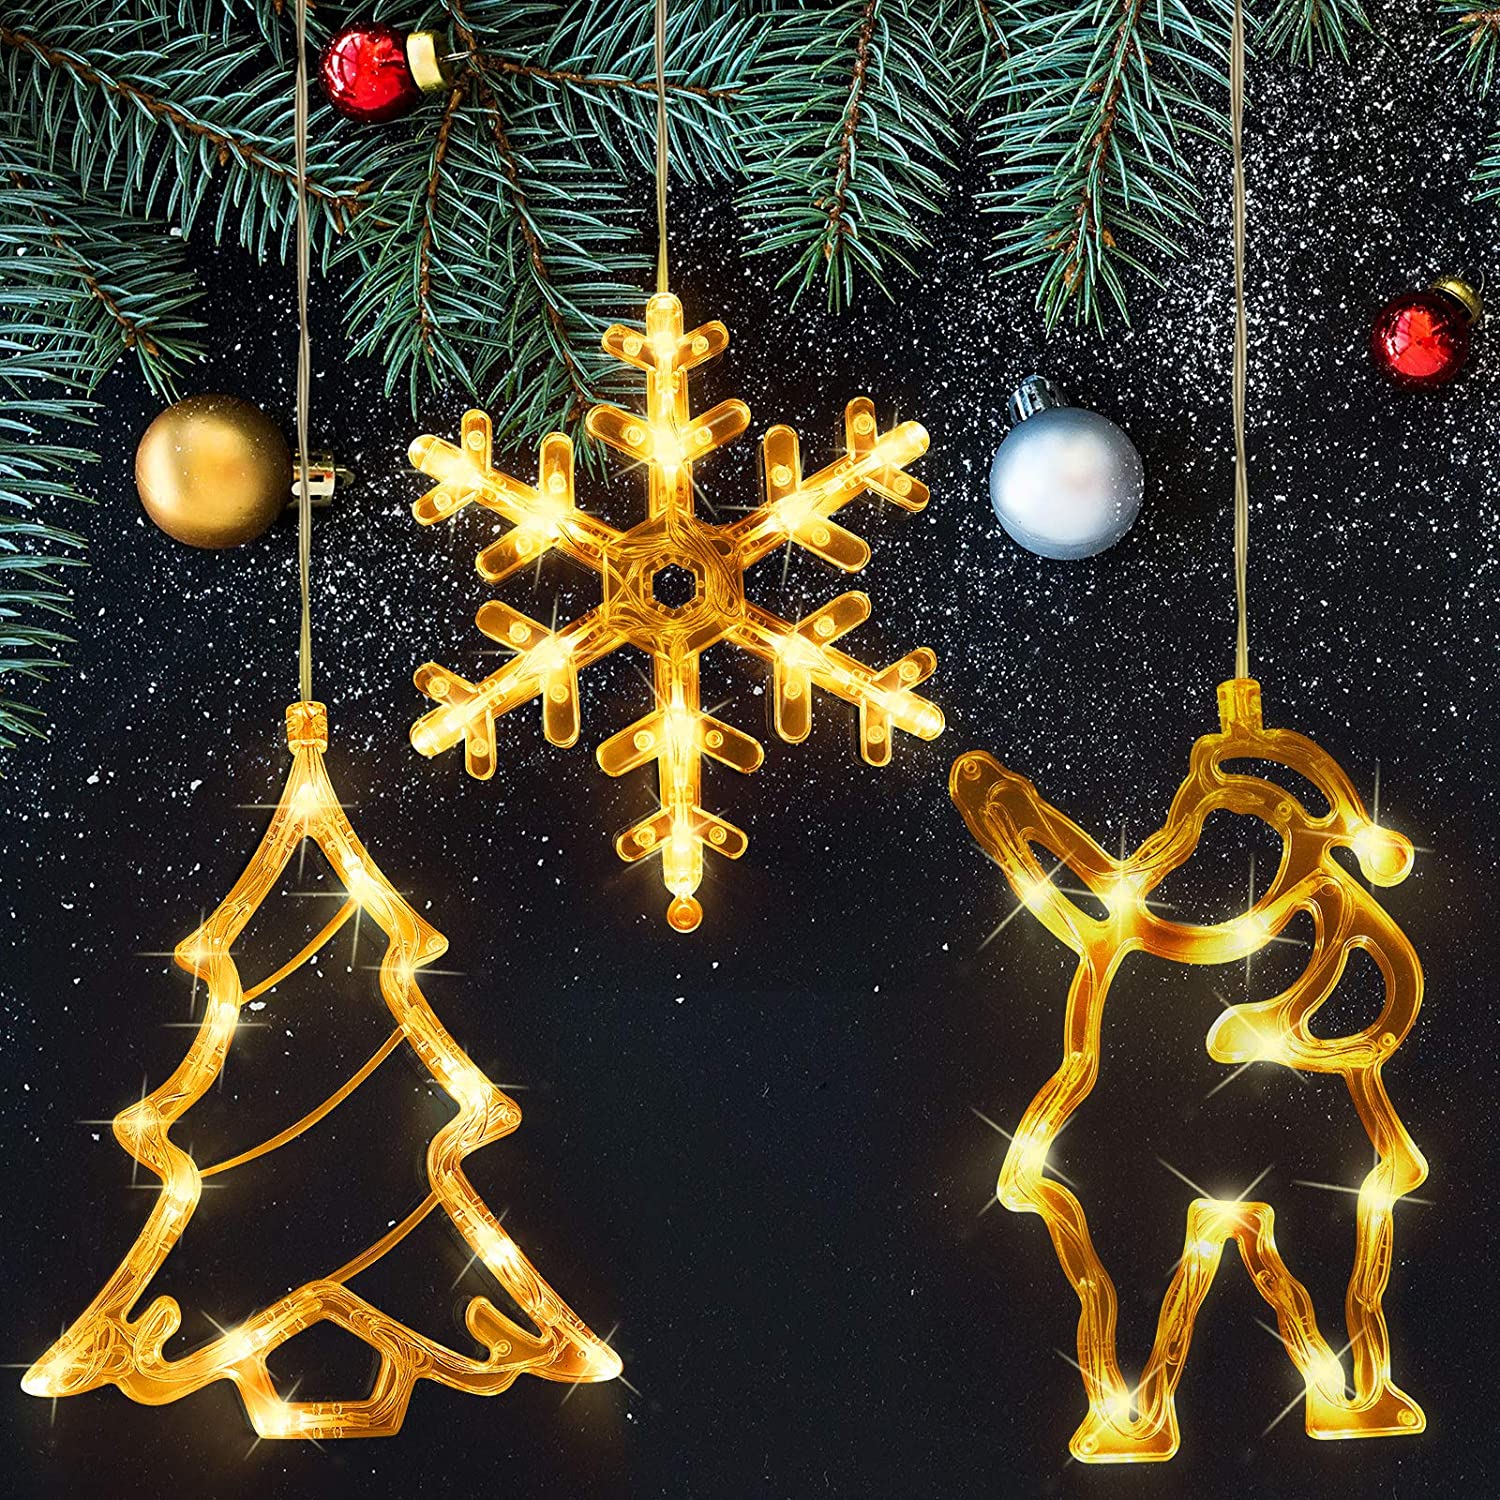 Bueautybox Christmas Led String Lights Christmas Bell Sucker Light Decorated Wire Twinkle Star Light Christmas Twinkle Star Room Window Wall Christmas Tree Decoration Holiday Lights - image 1 of 7